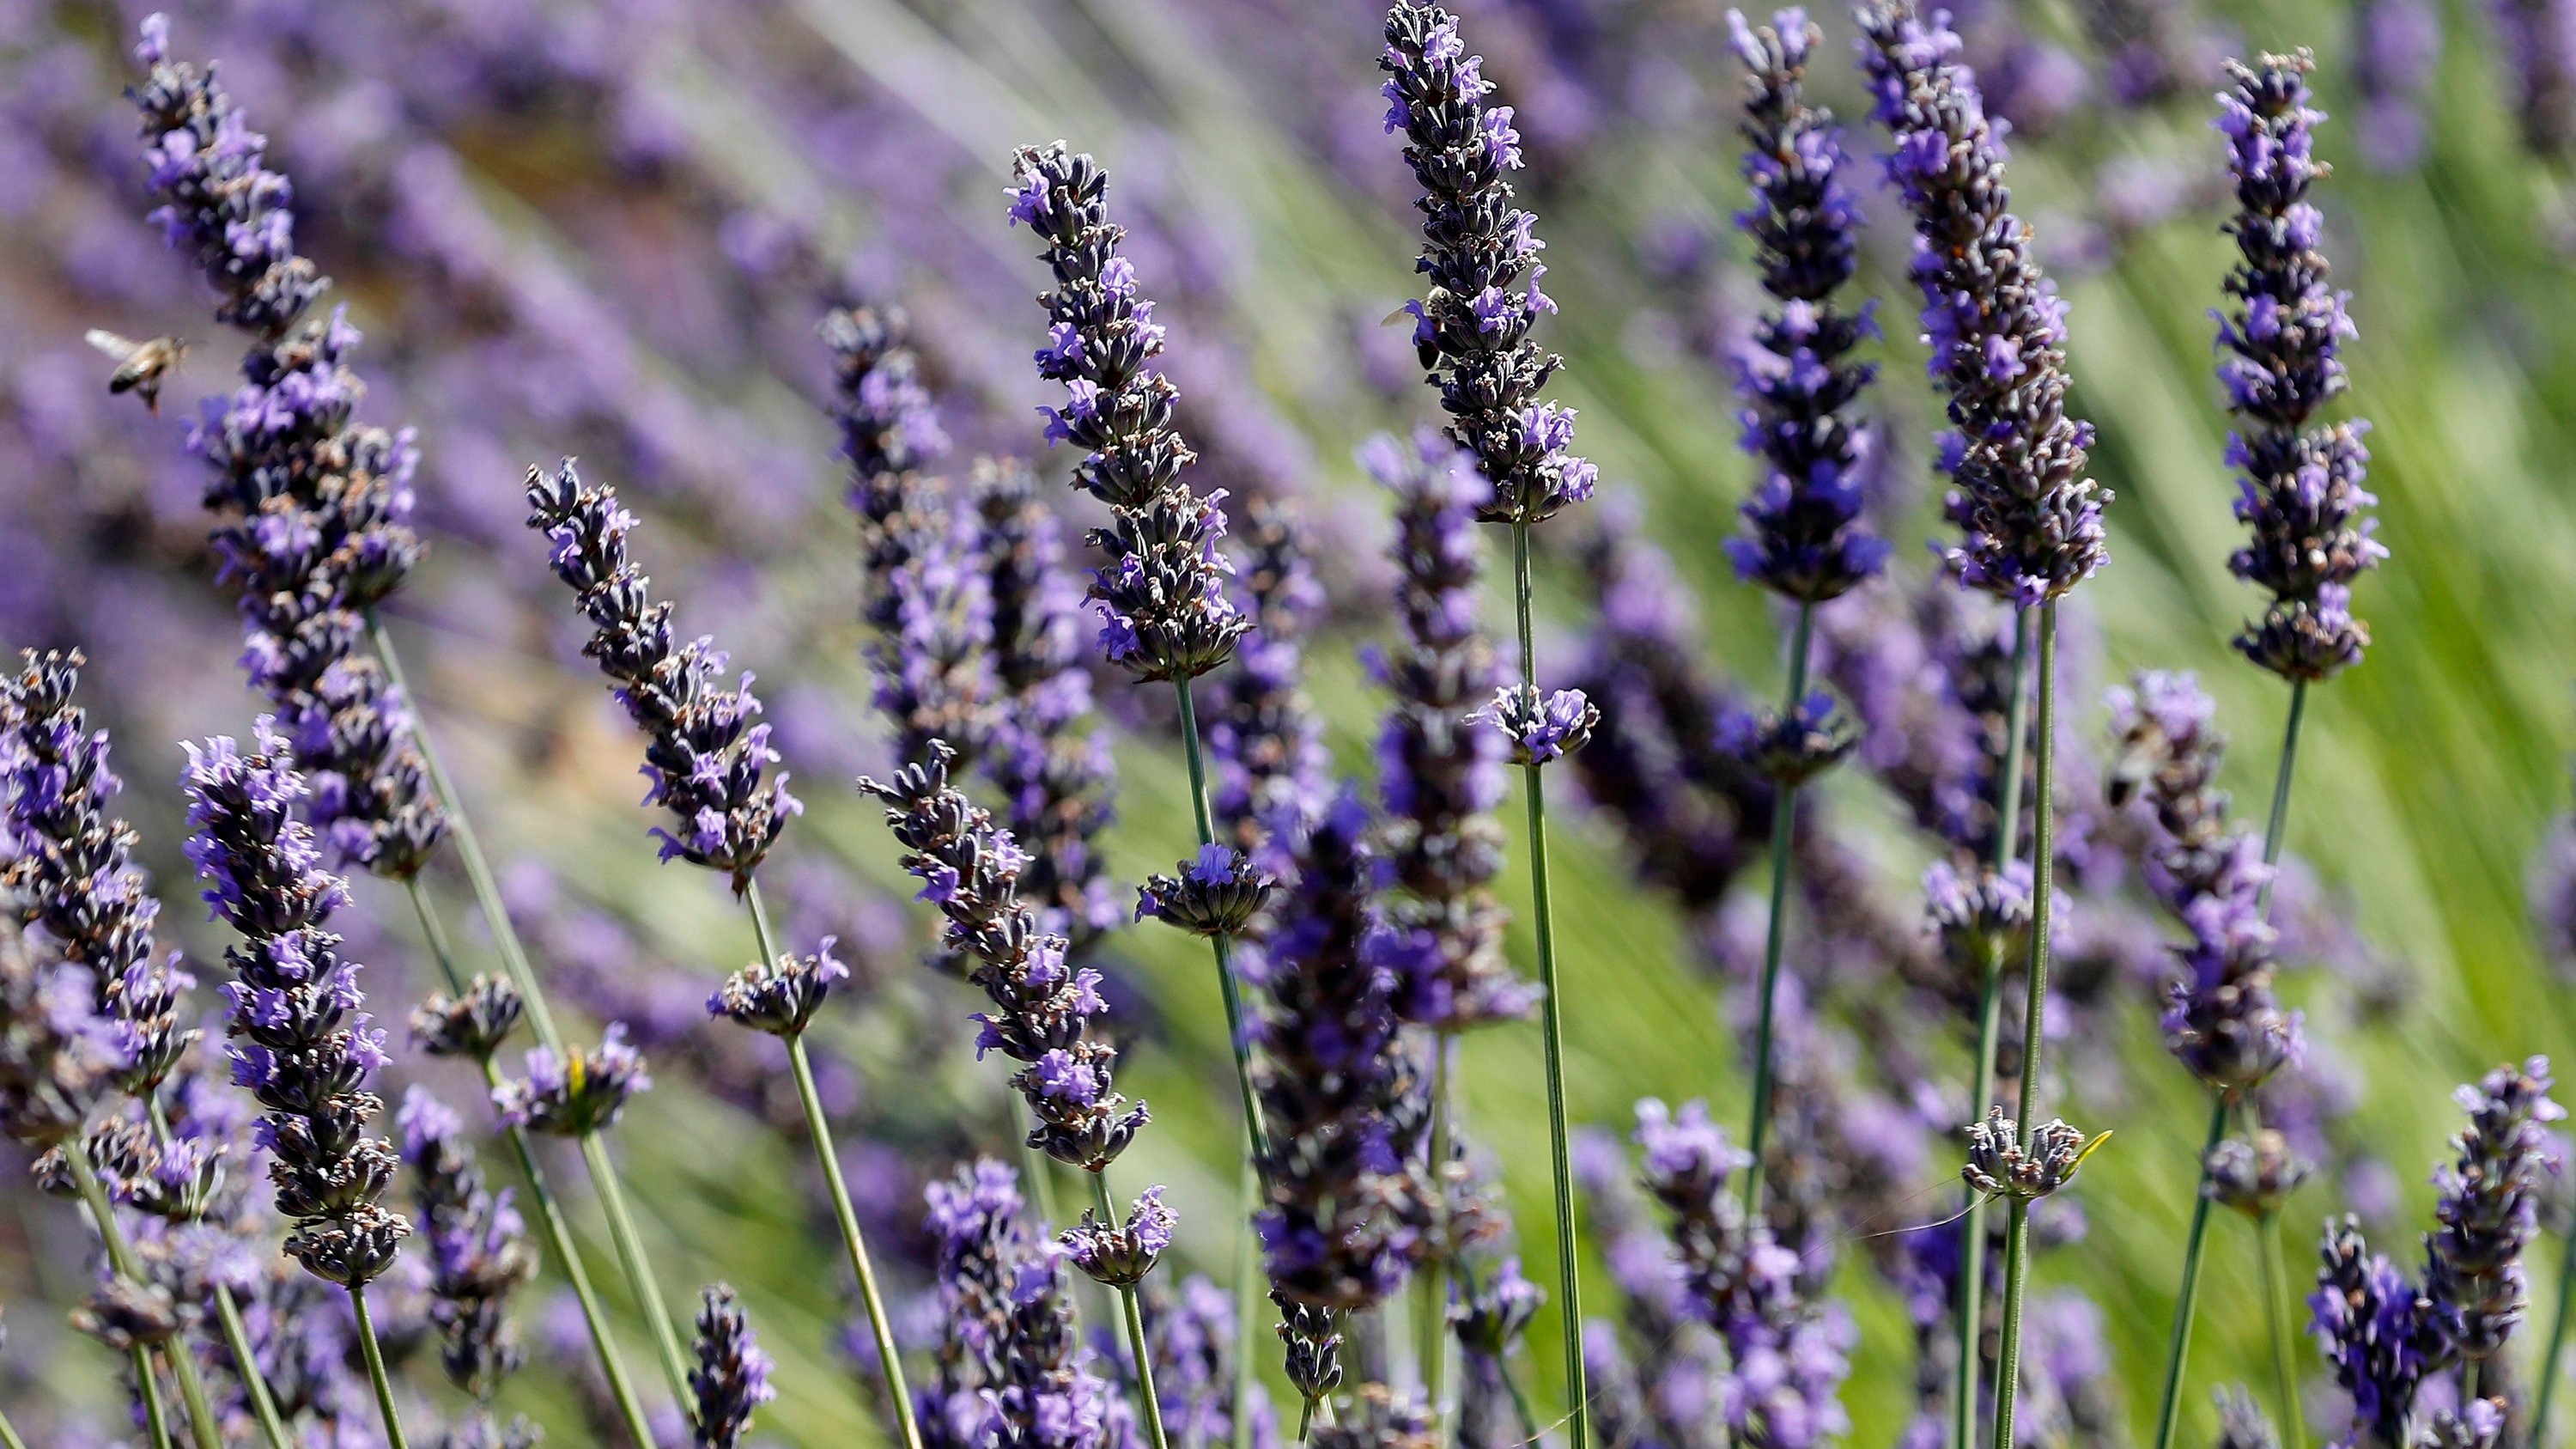 Why Does My Lavender Not Smell?